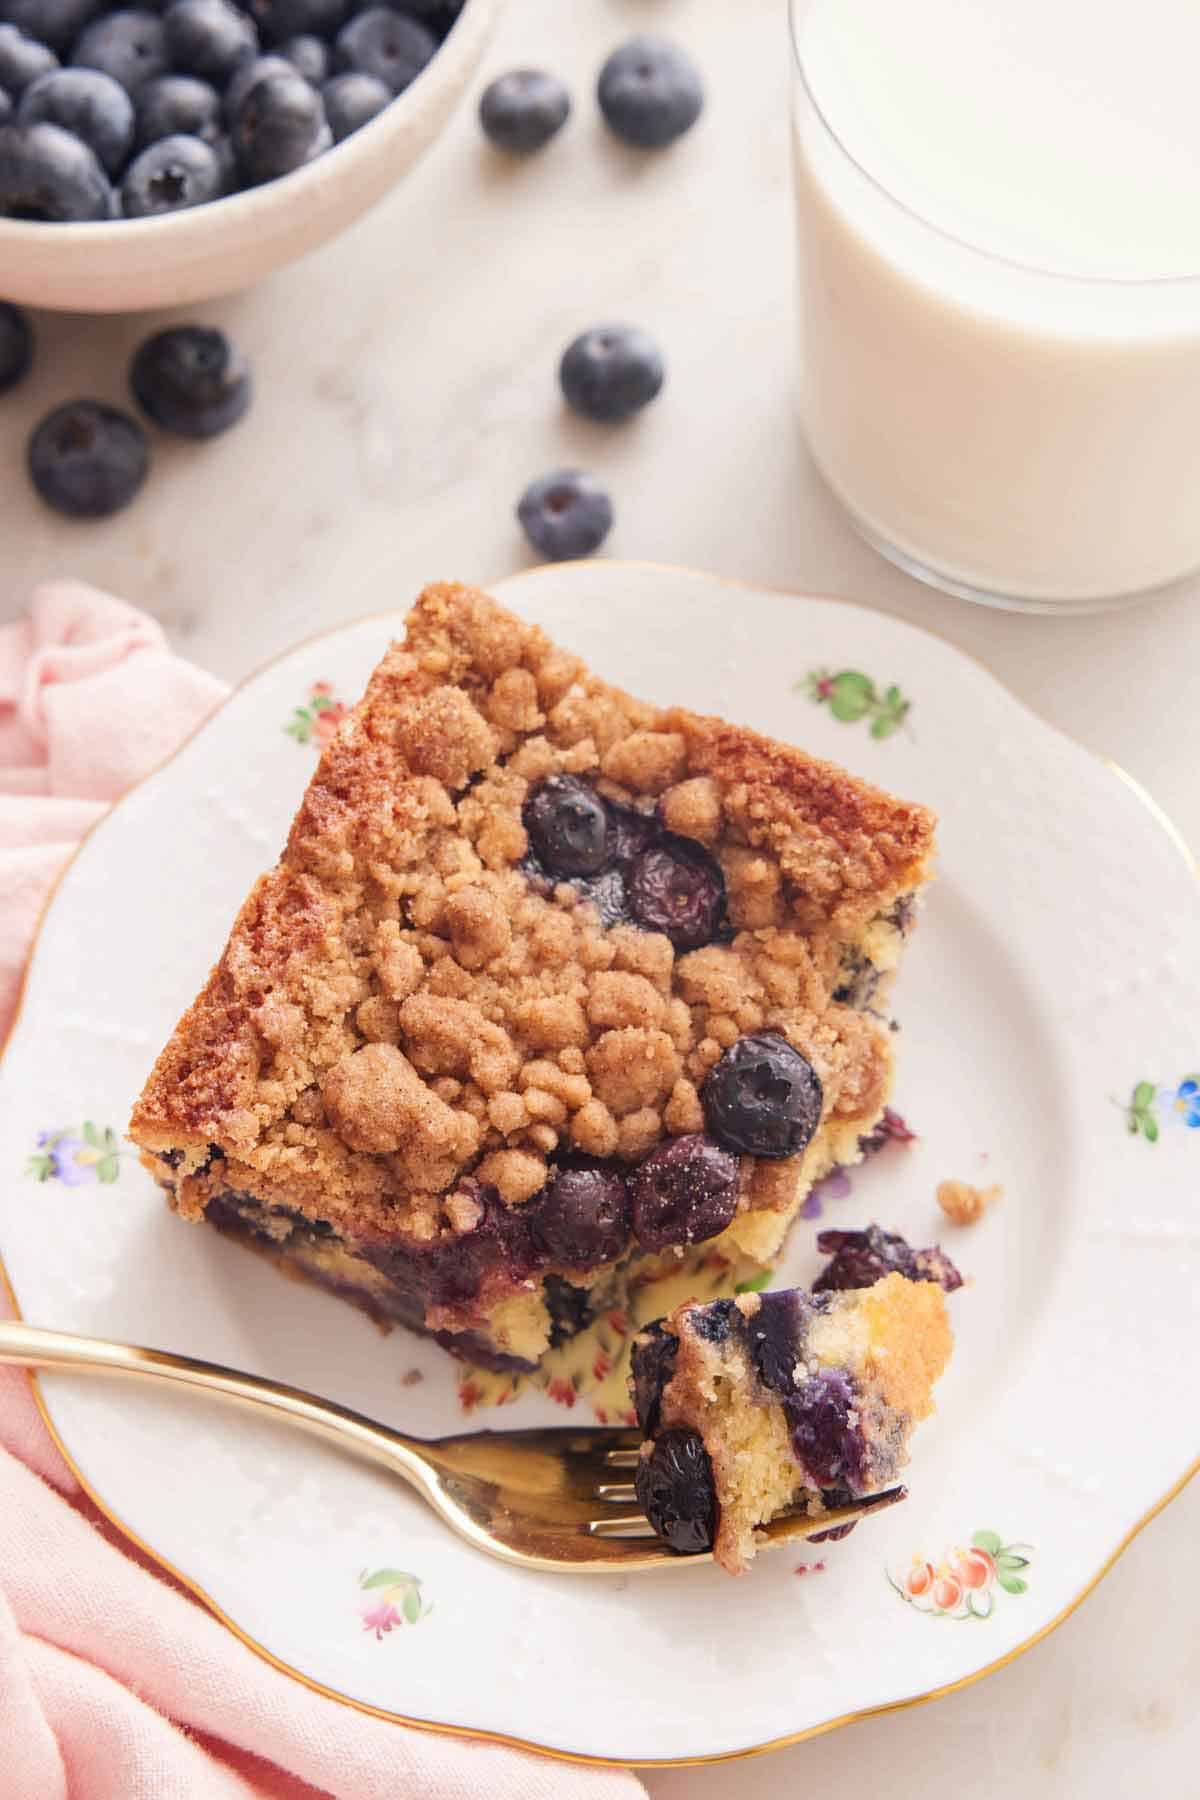 A plate with a piece of blueberry buckle with the corner bit on a fork.